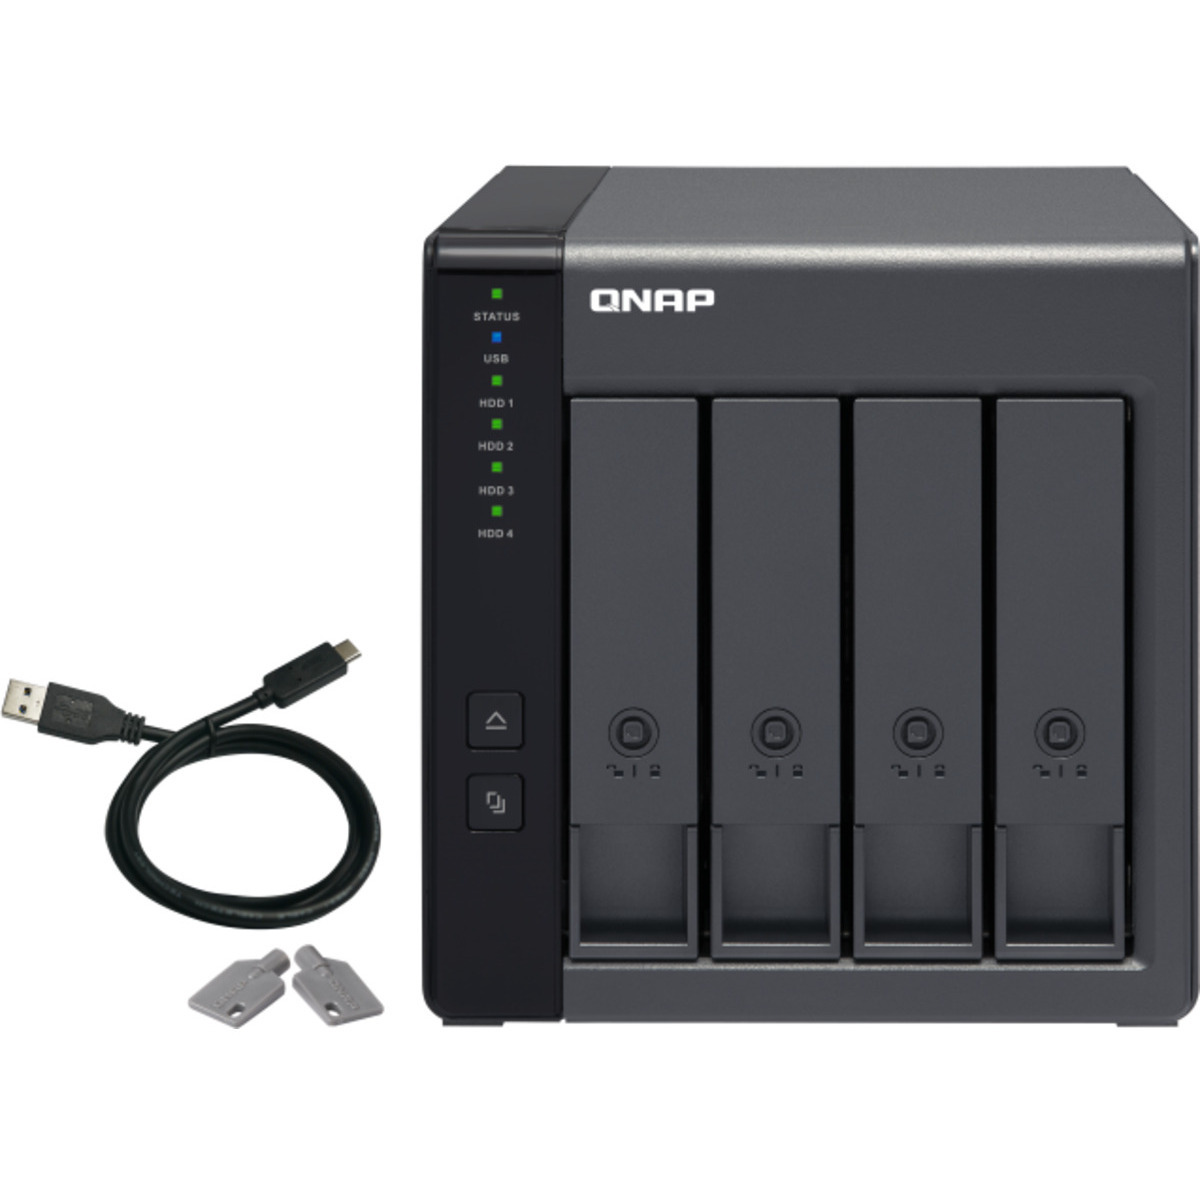 QNAP TR-004 External Expansion Drive 18tb 4-Bay Desktop Multimedia / Power User / Business Expansion Enclosure 3x6tb Seagate IronWolf Pro ST6000NT001 3.5 7200rpm SATA 6Gb/s HDD NAS Class Drives Installed - Burn-In Tested TR-004 External Expansion Drive